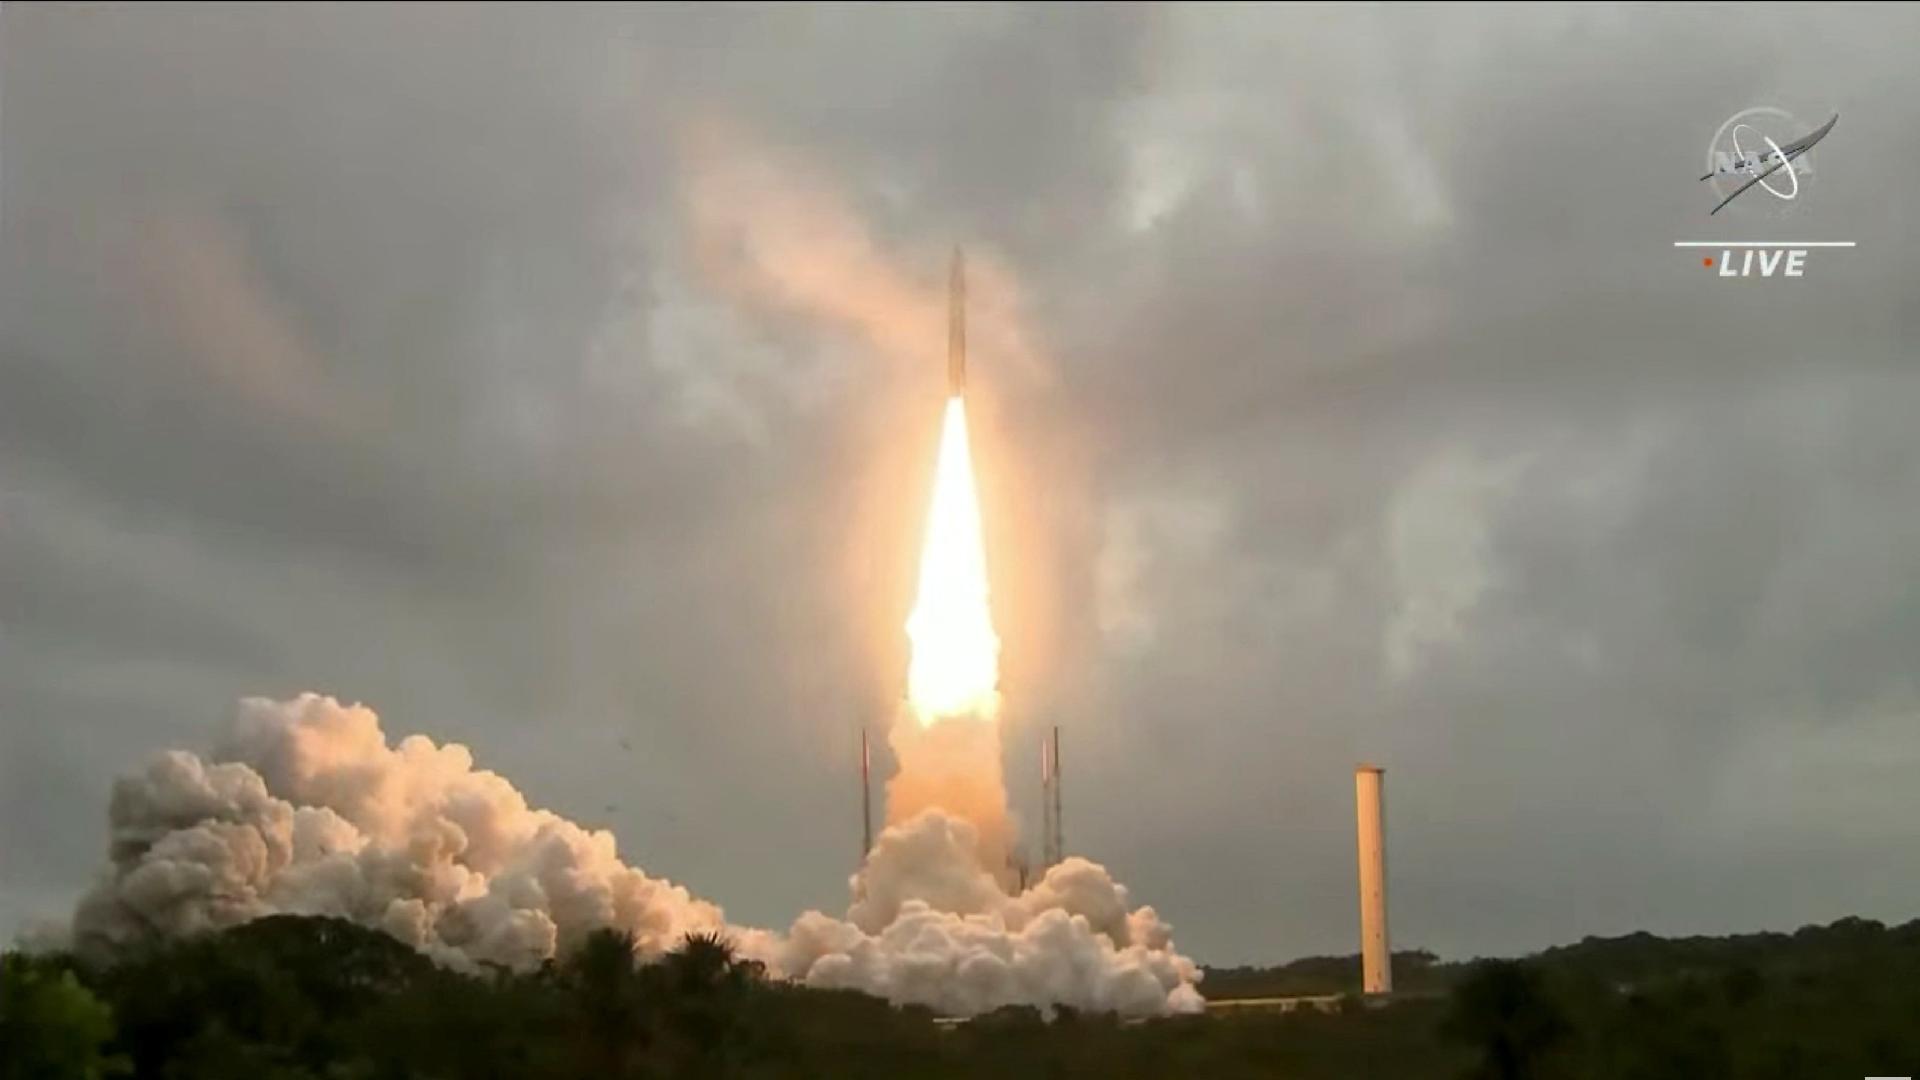 At around 9:20 am ET, as scheduled, the Ariane 5 rocket was launched with the James Webb Space Telescope on board.  Mission considered a success by NASA, Esa (European Space Agency) and CSA (Canadian Space Agency) - Nasa/Nasa TV/Handout via Reuters